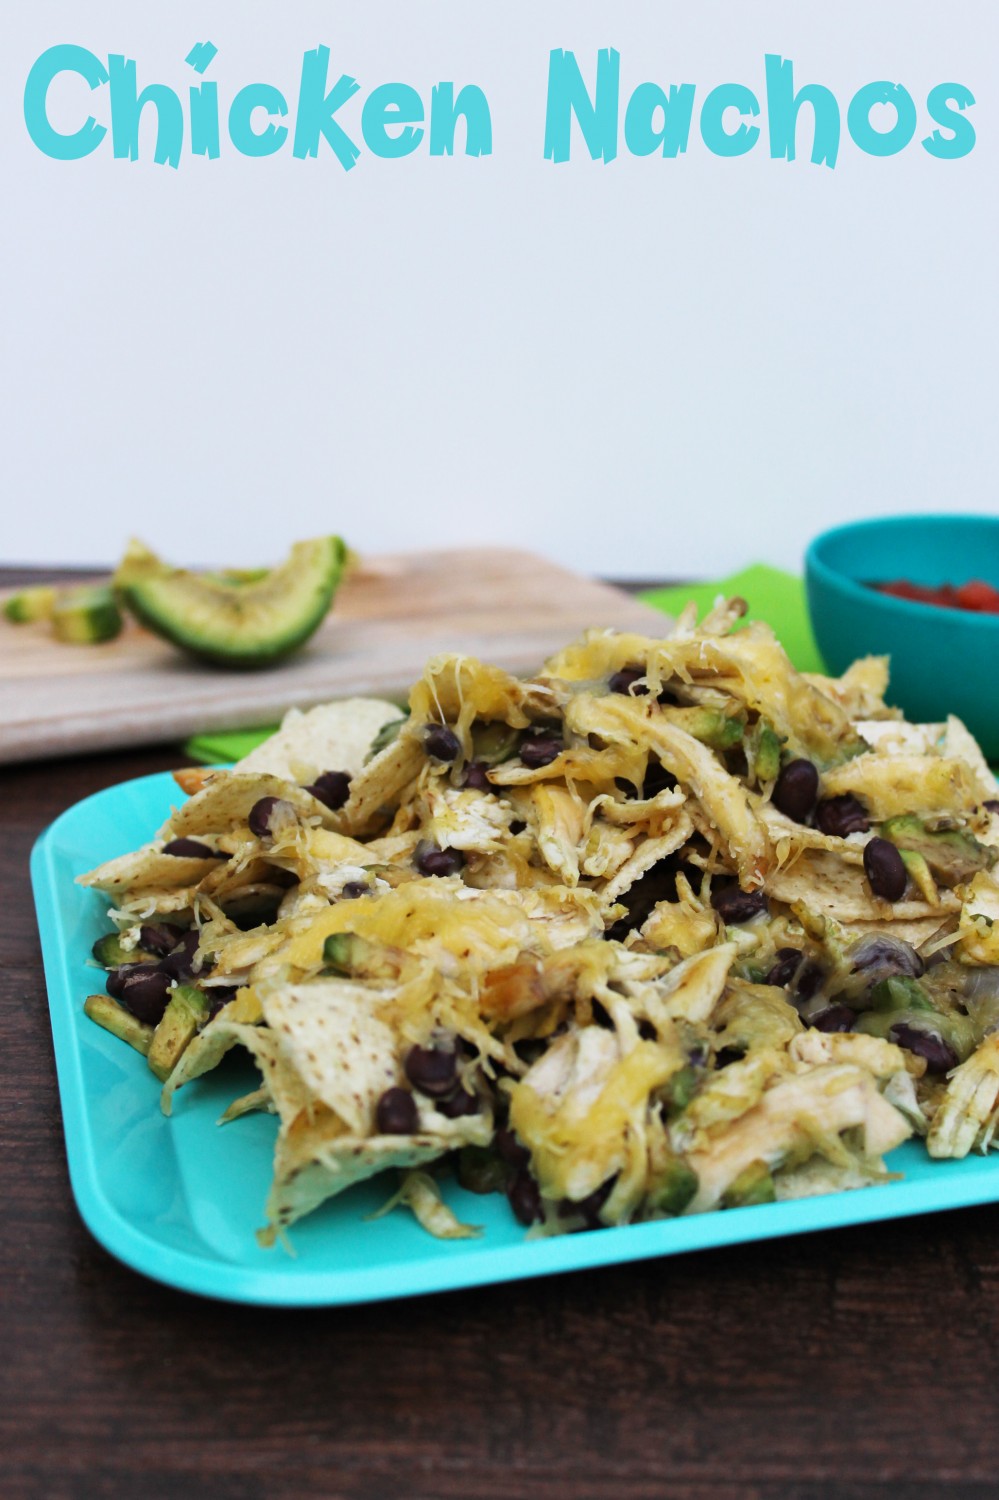 A fun way to serve dinner to toddlers is by making Nachos!